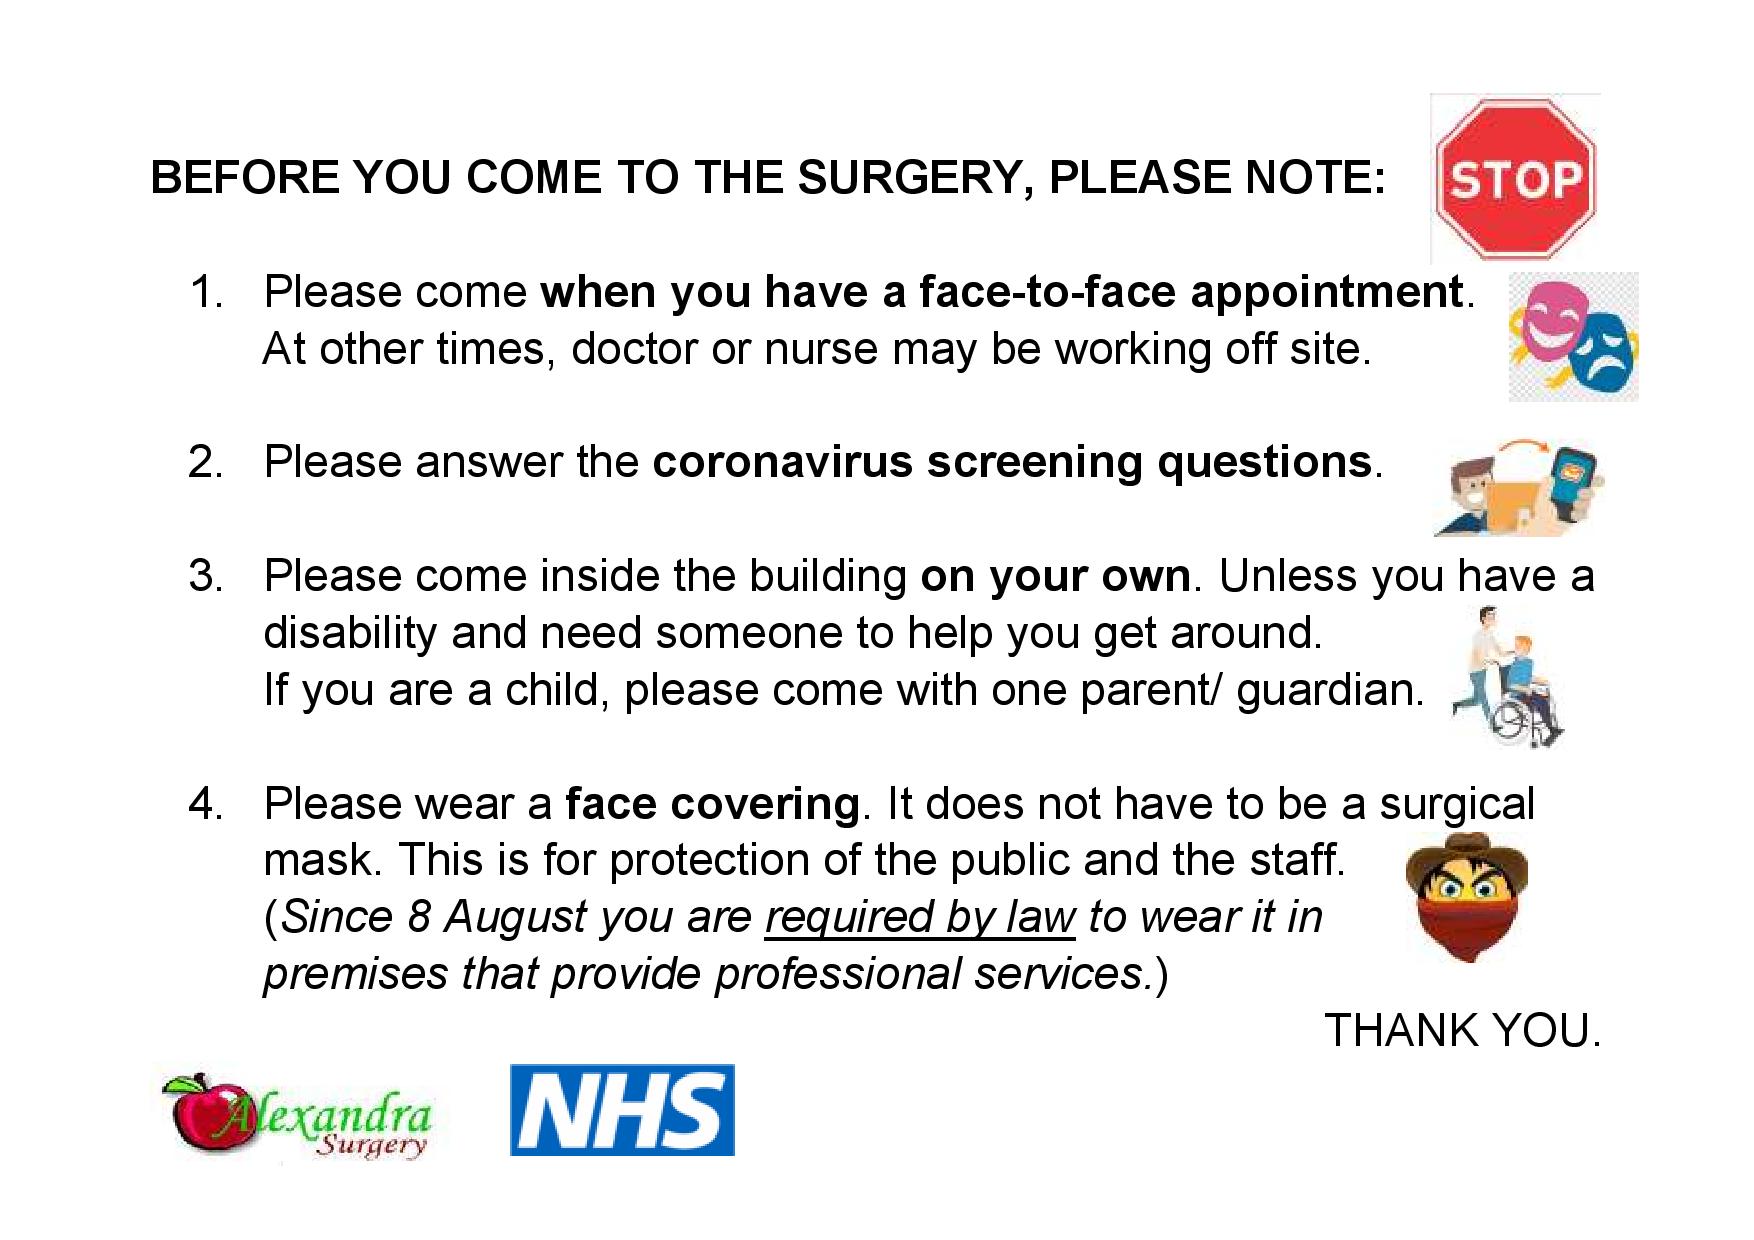 Before you come to the surgery